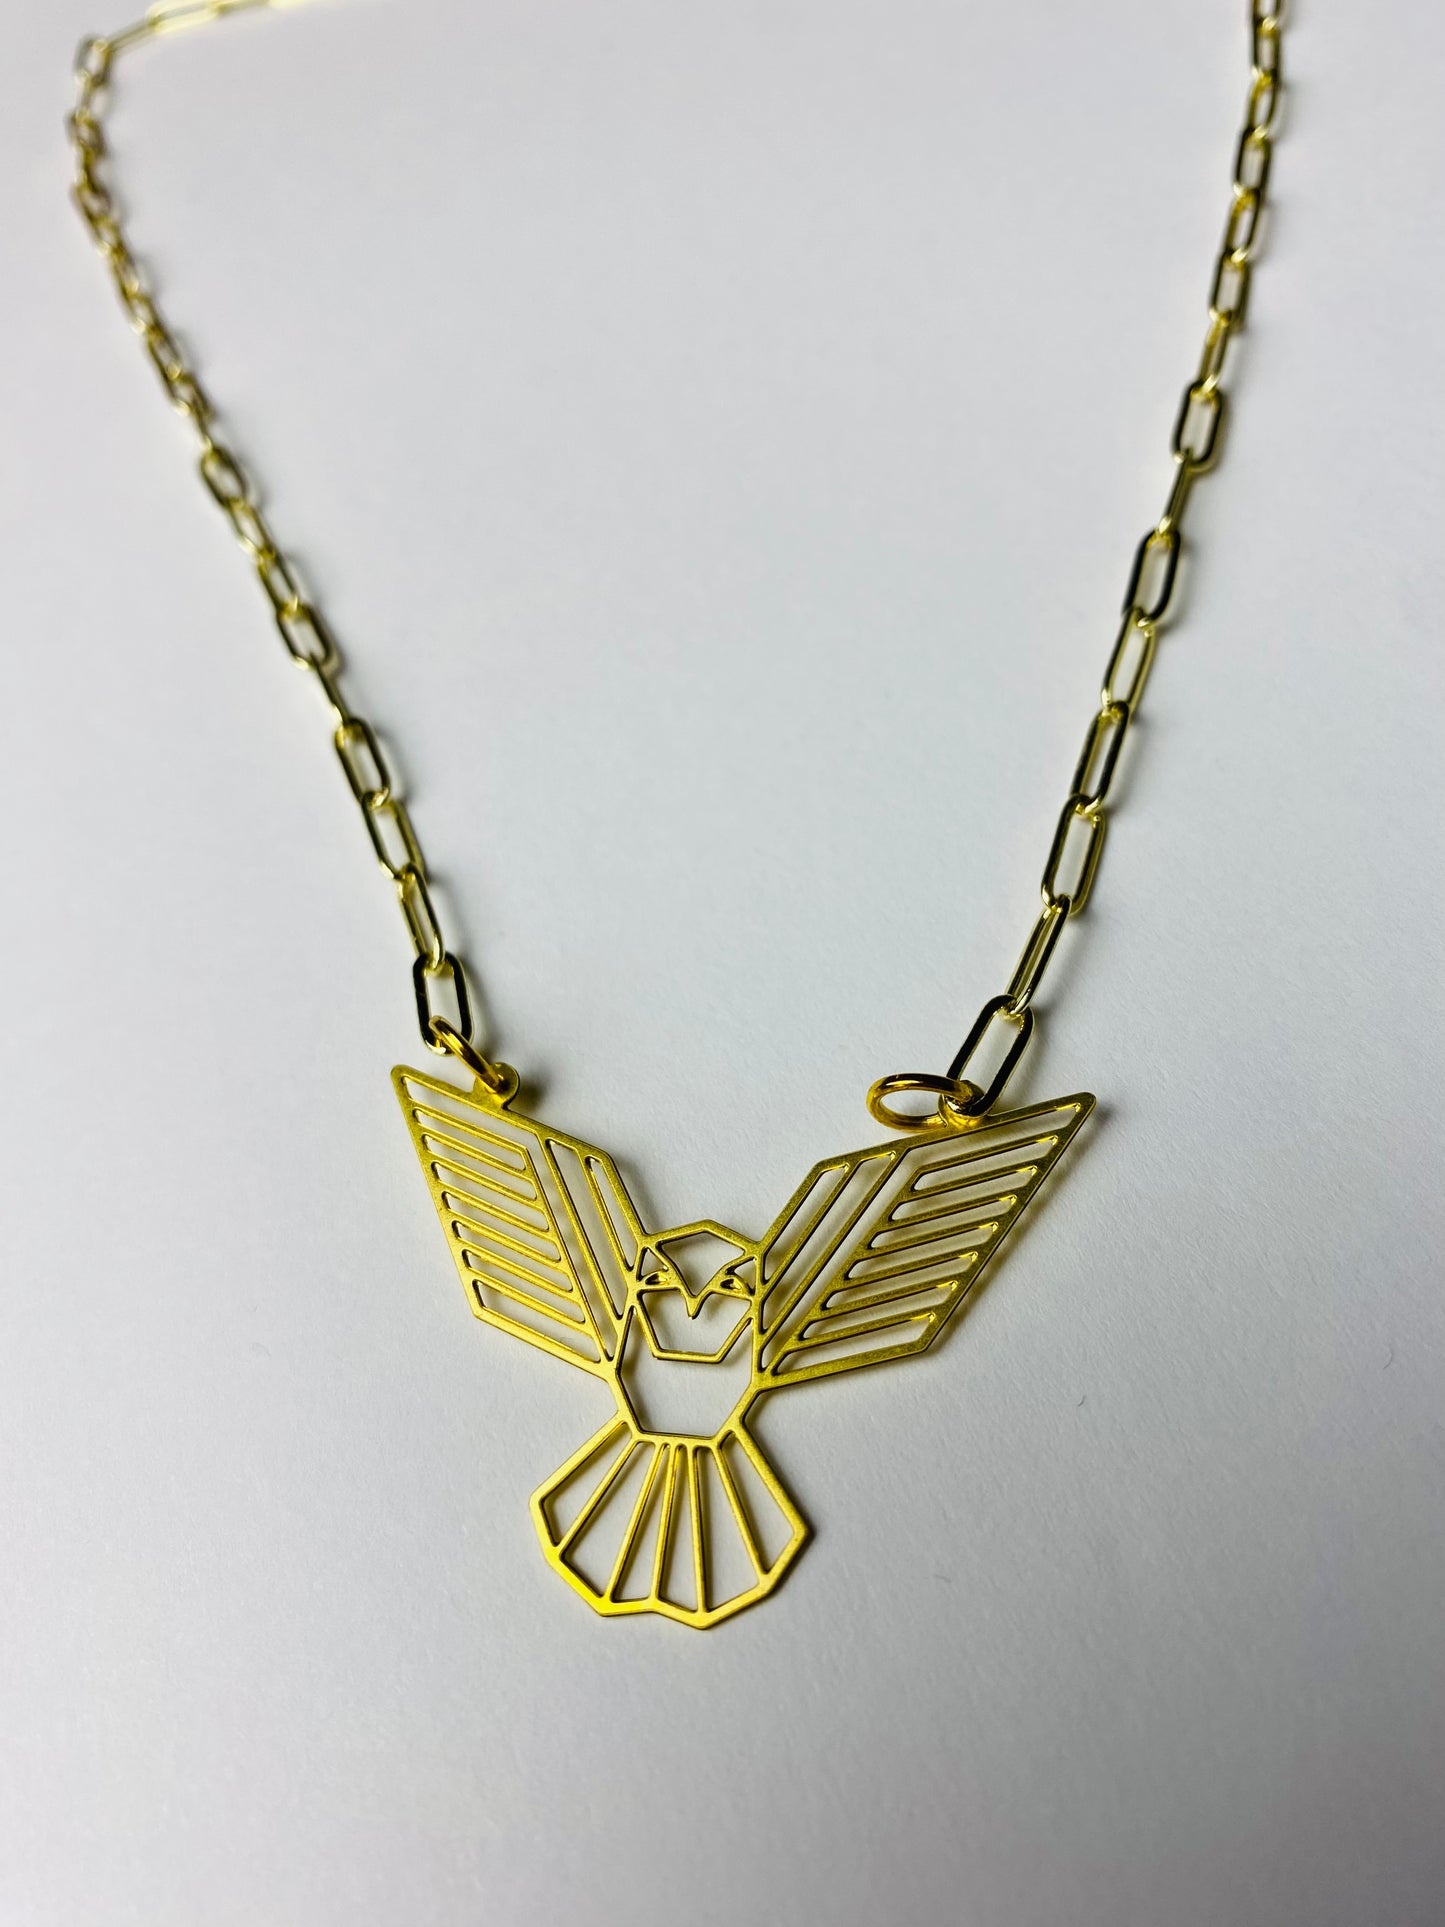 Phoenix brass necklace on 14k plated chain